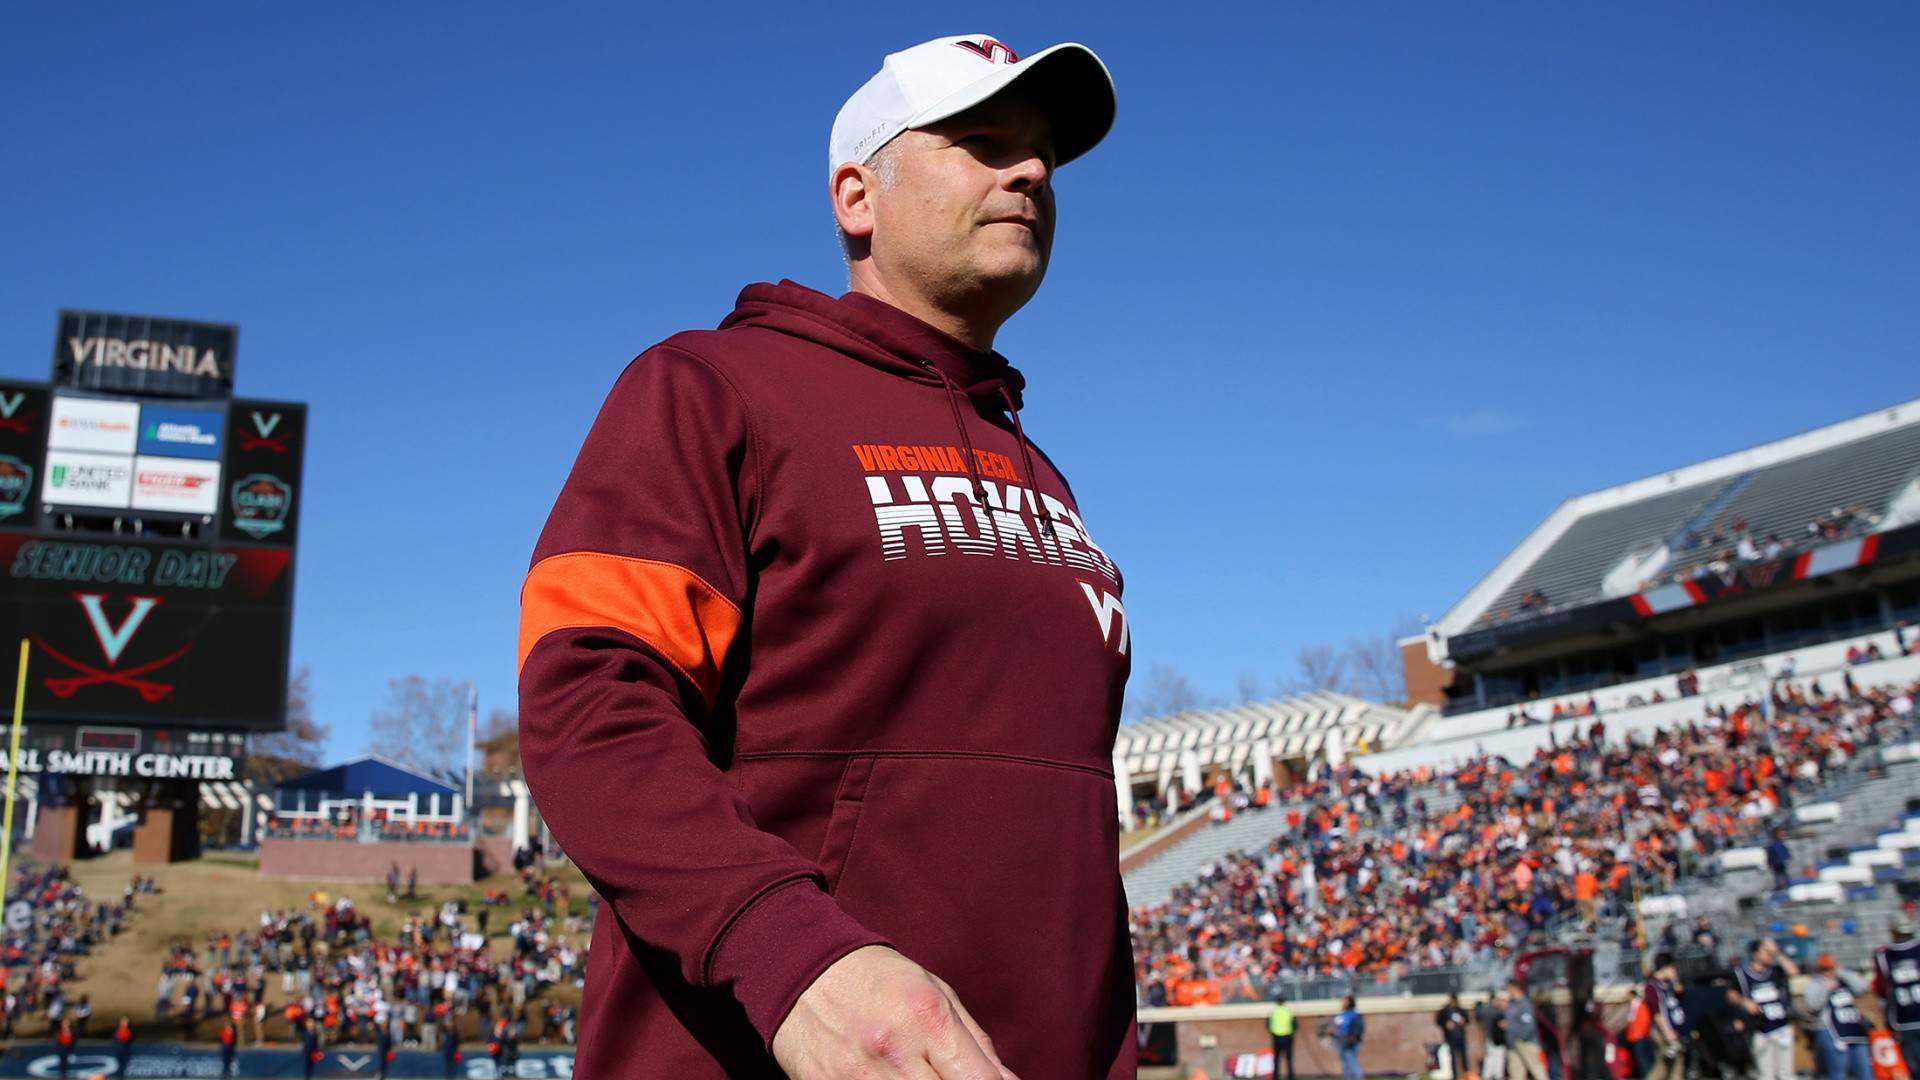 No spring game for Virginia Tech this year